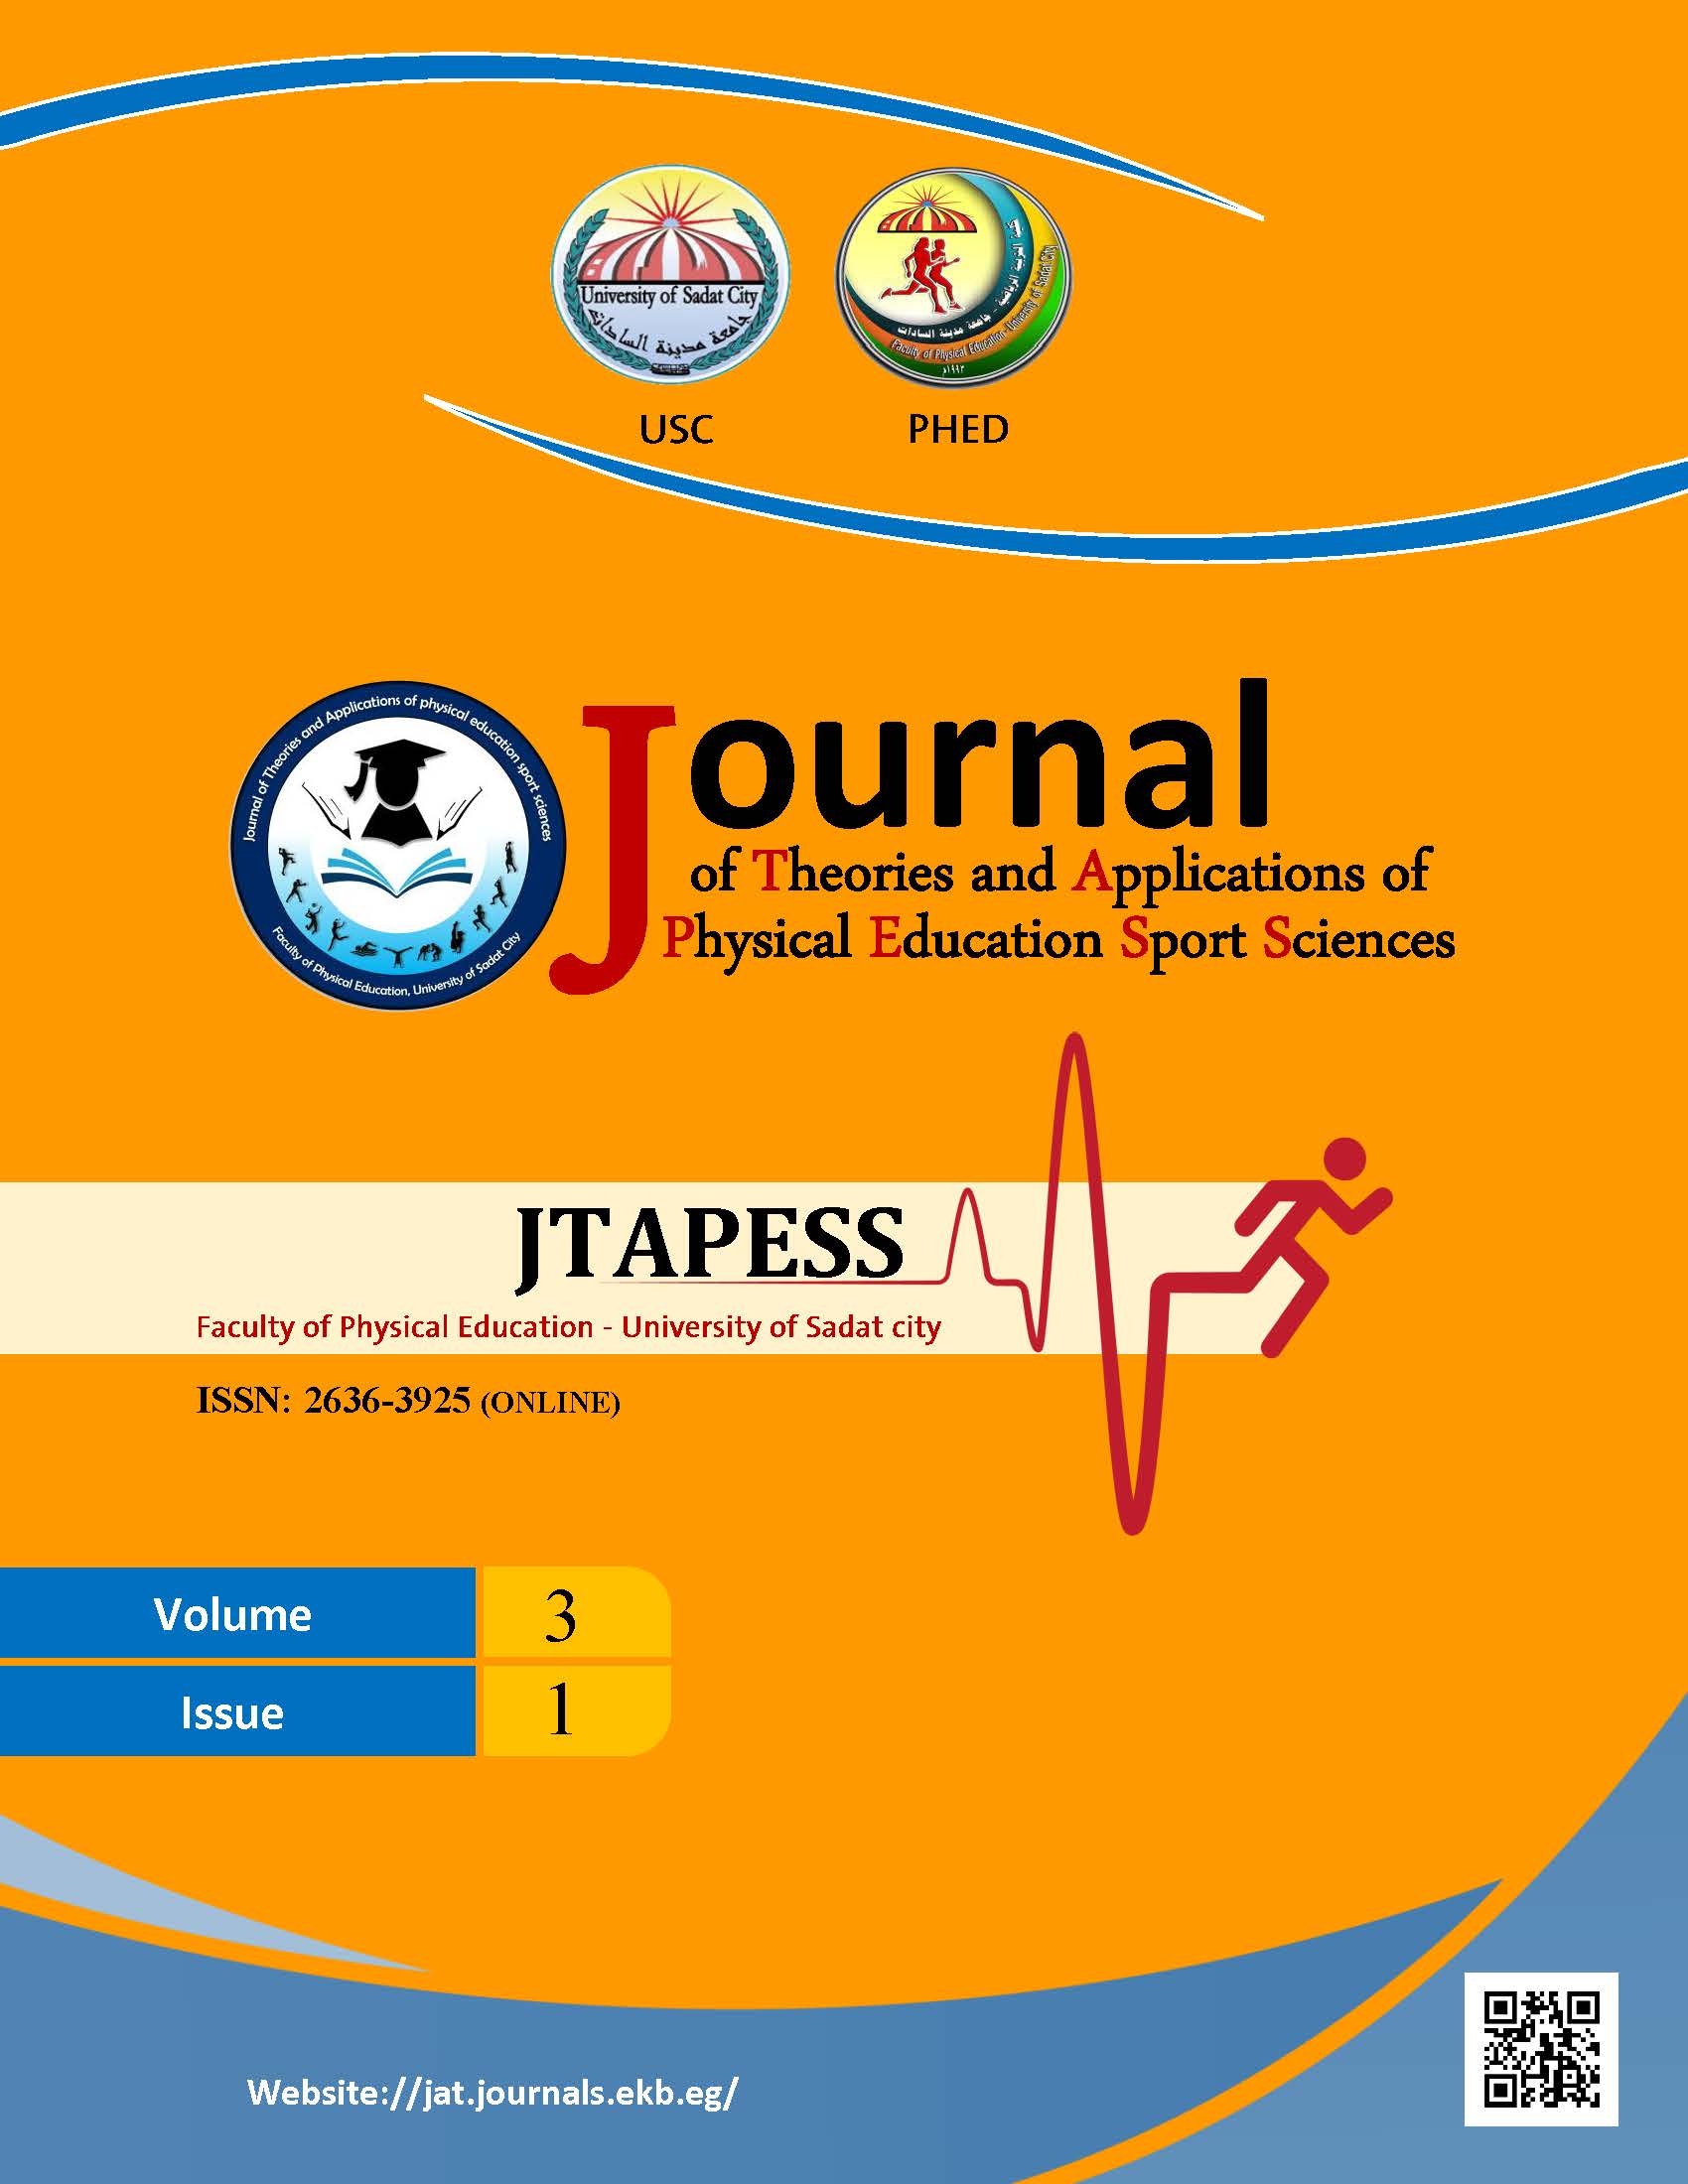 Journal of Theories and Applications of Physical Education Sport Sciences